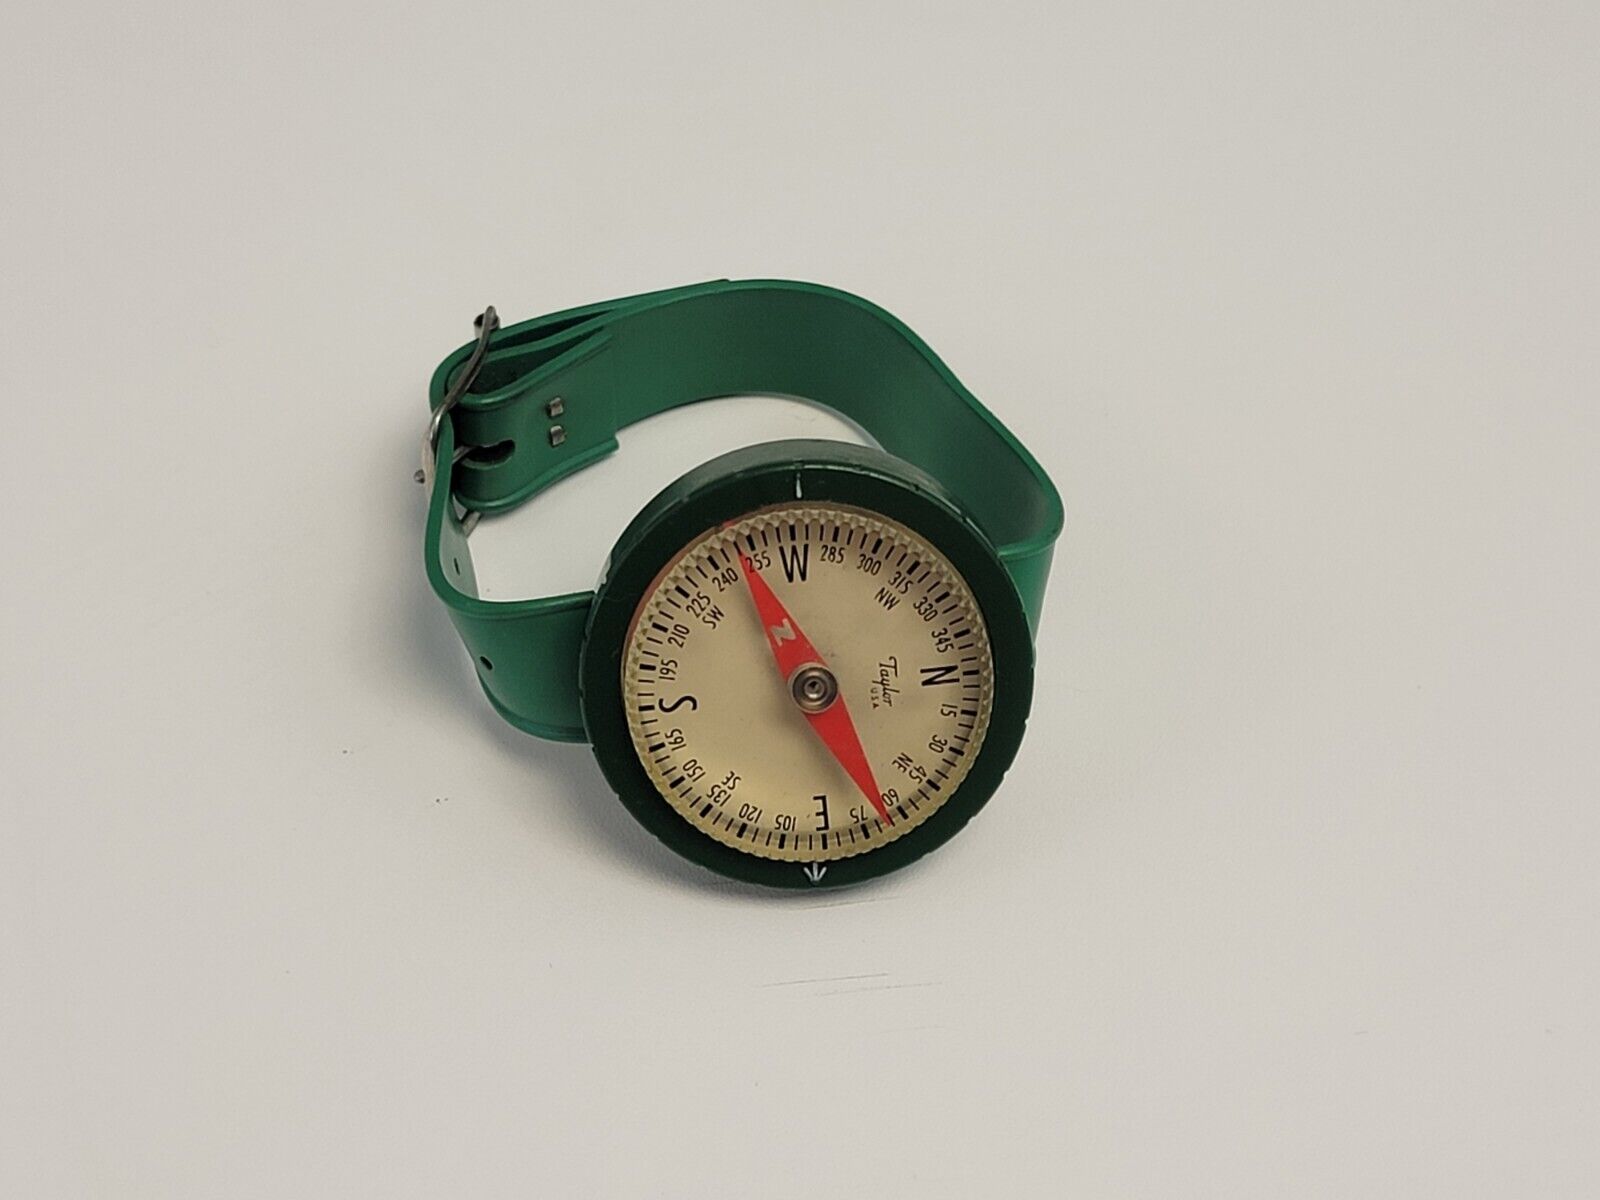 VINTAGE TAYLOR INSTRUMENT COMPANIES GREEN COMPASS WITH WRIST BAND PLASTIC RARE